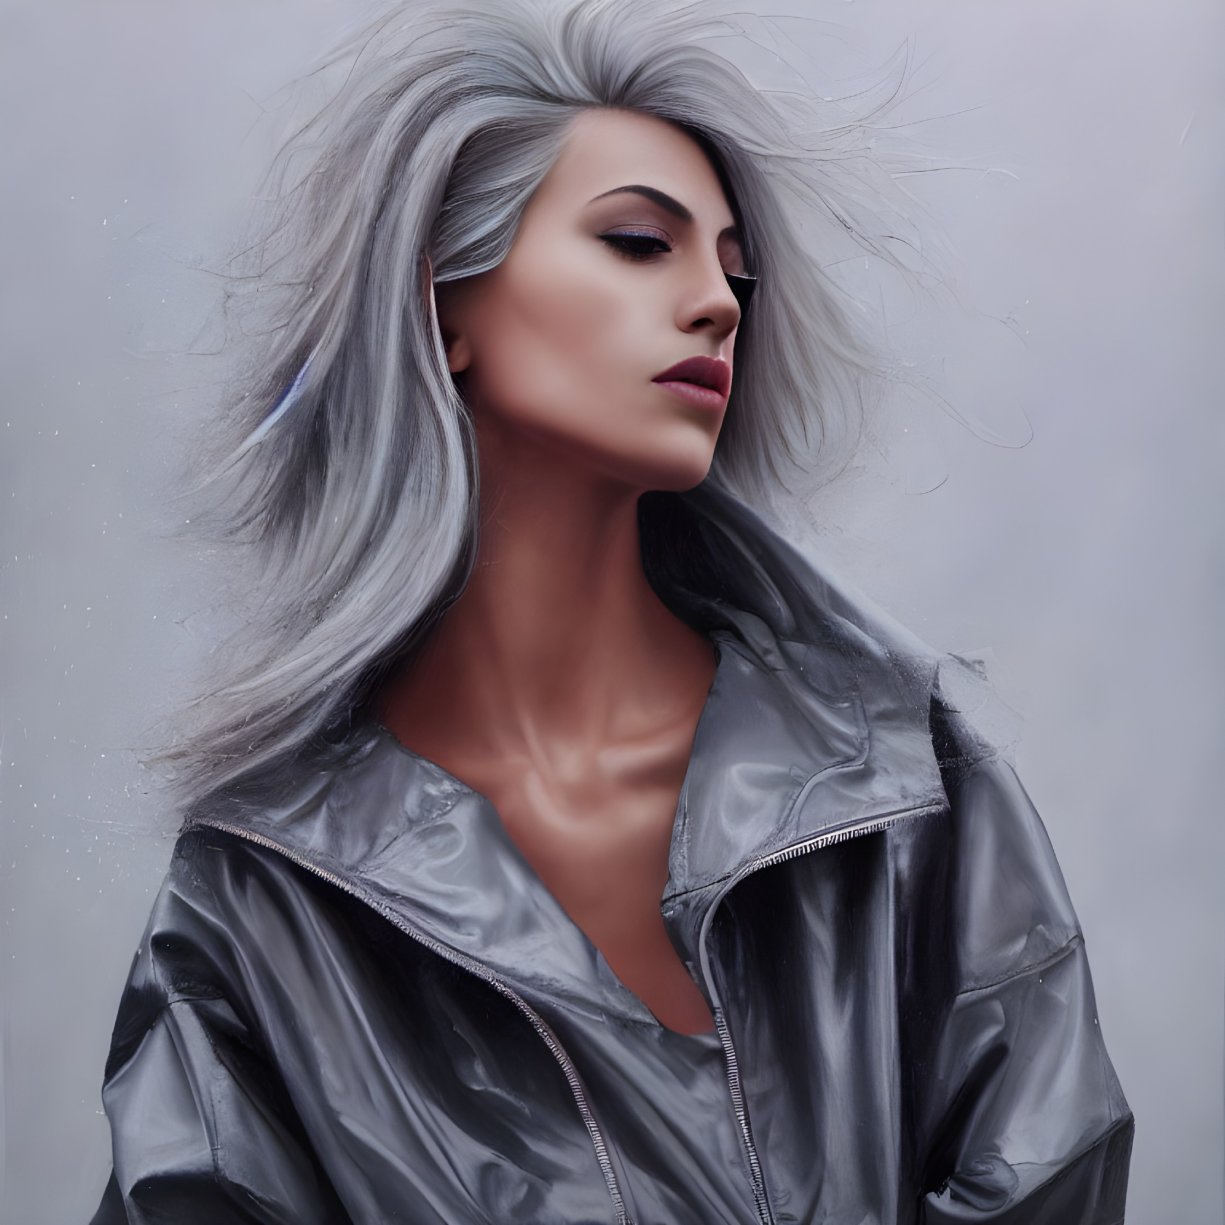 Illustration: Stylish woman with silver hair and jacket, emitting sophistication.